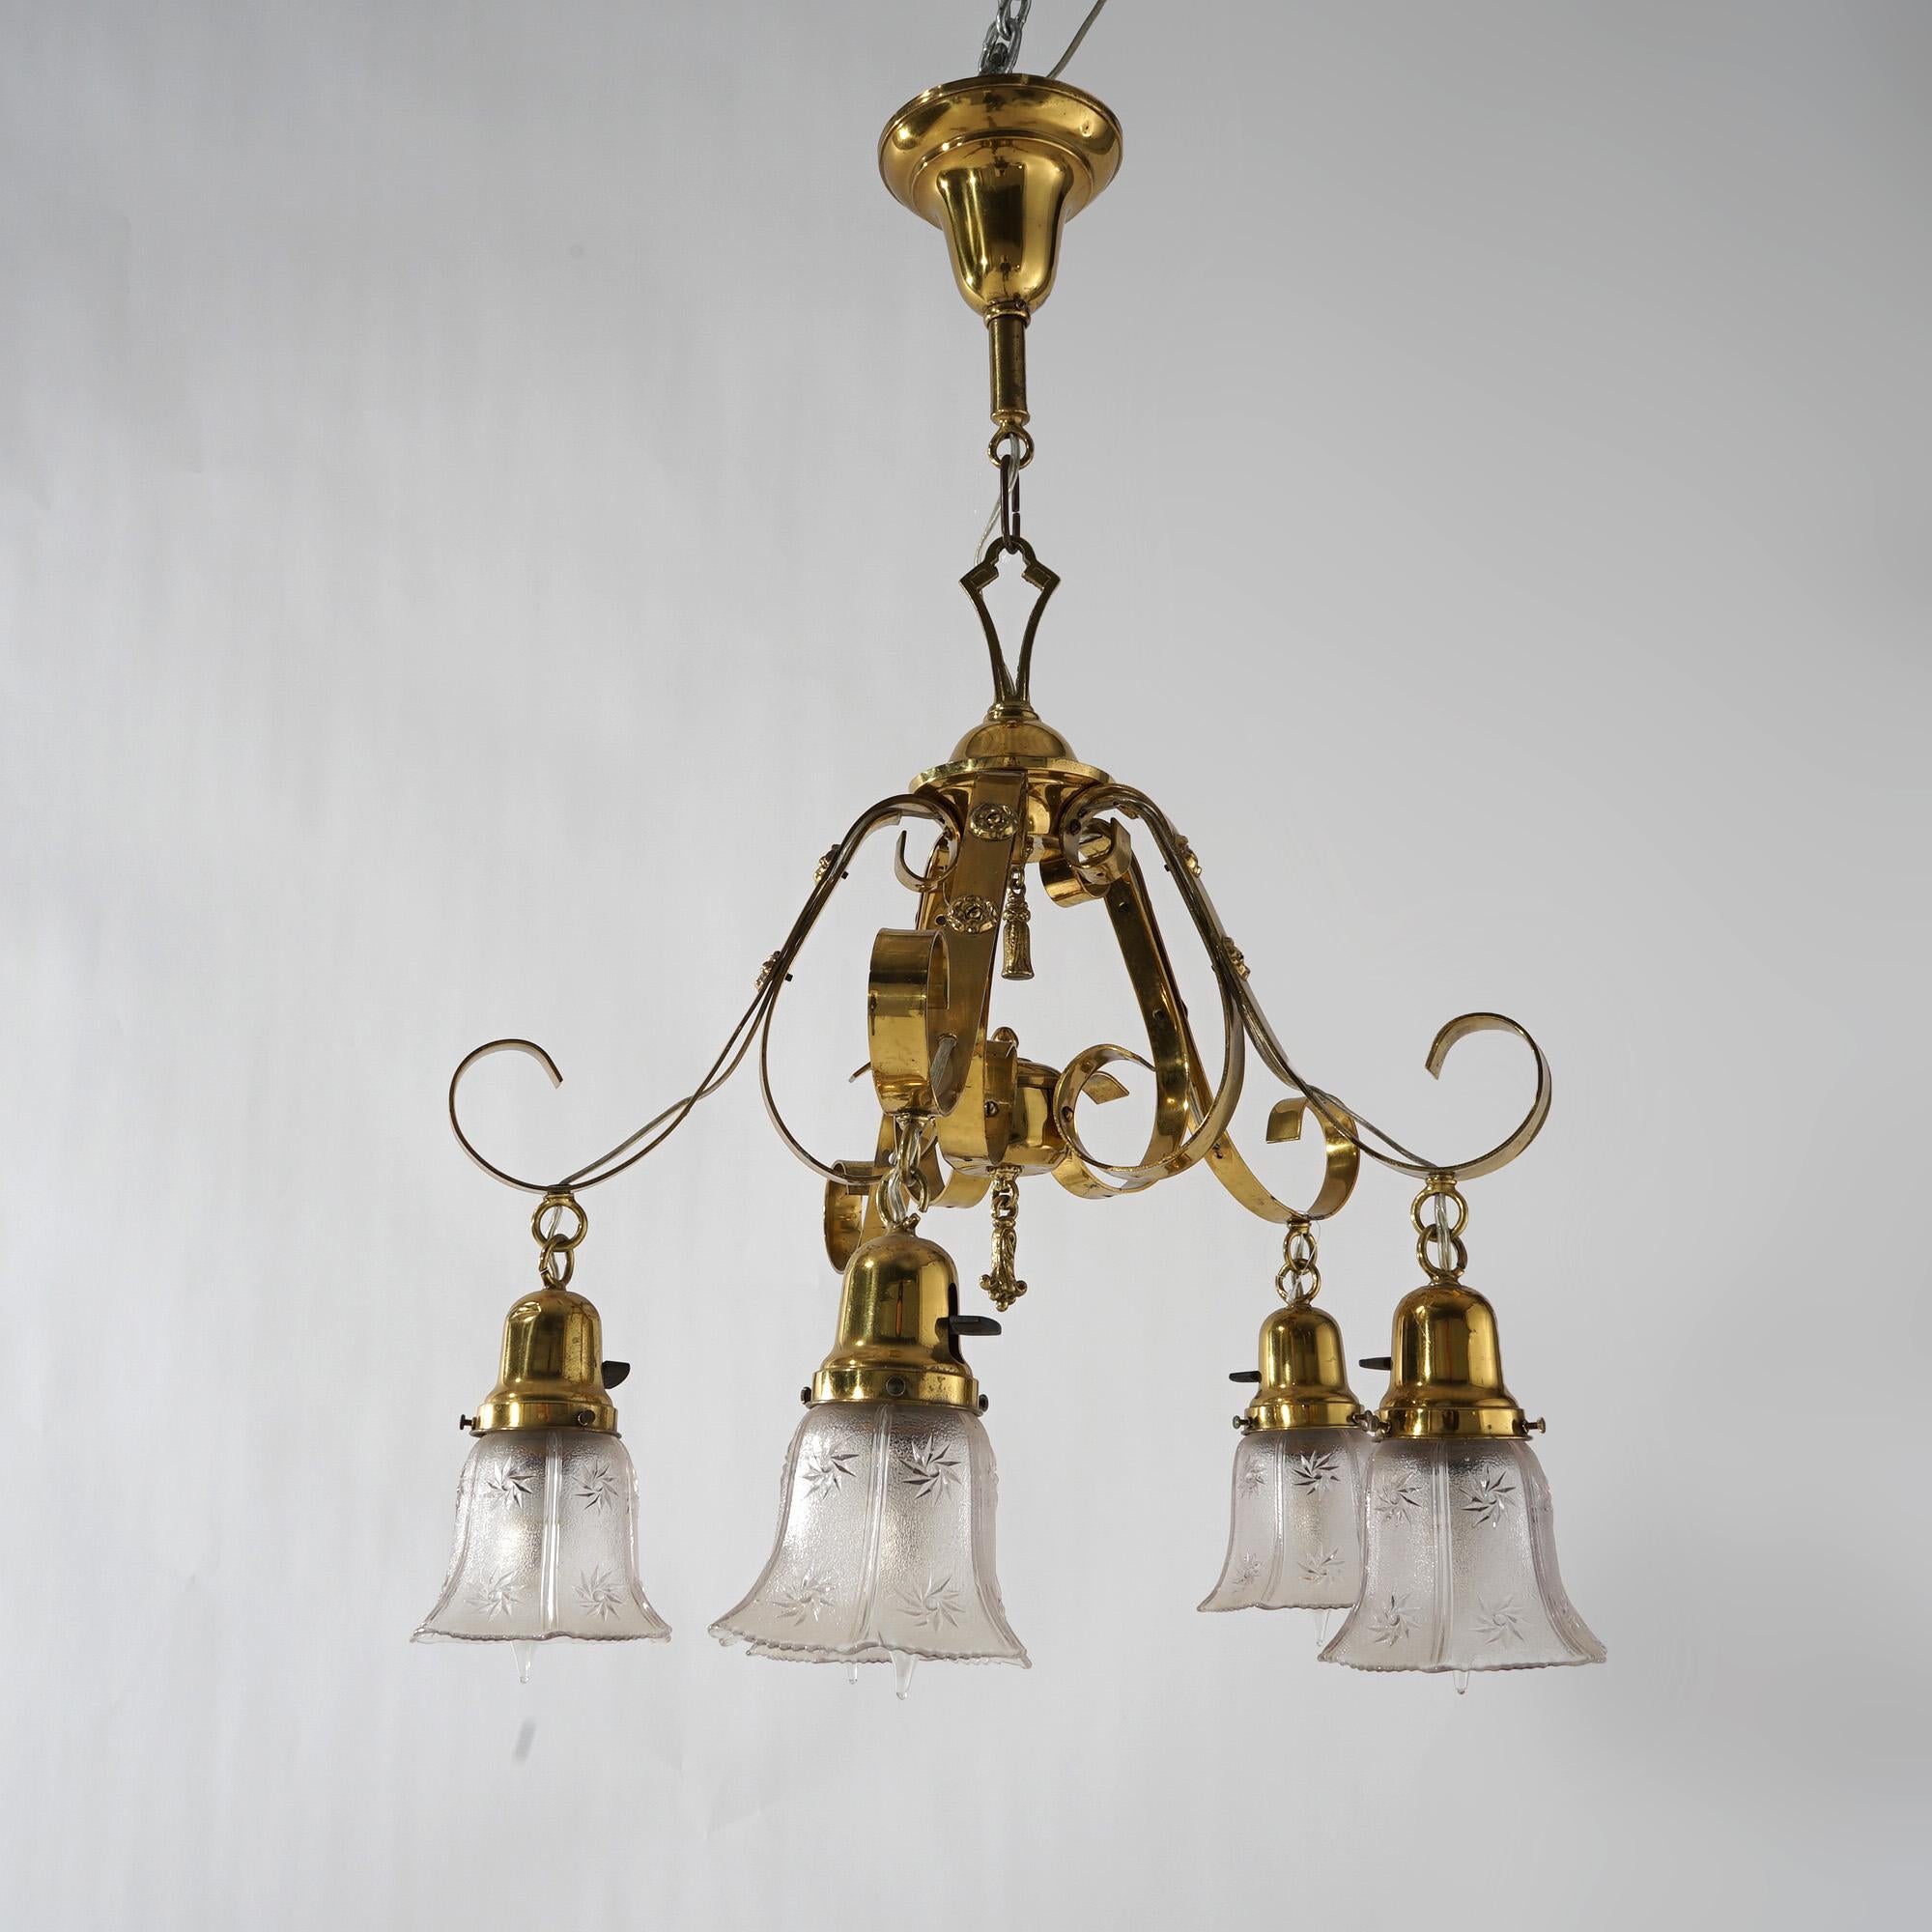 Antique Arts & Crafts Gilt Metal & Brass Hanging Fixture, Embossed Shades c1920 For Sale 1